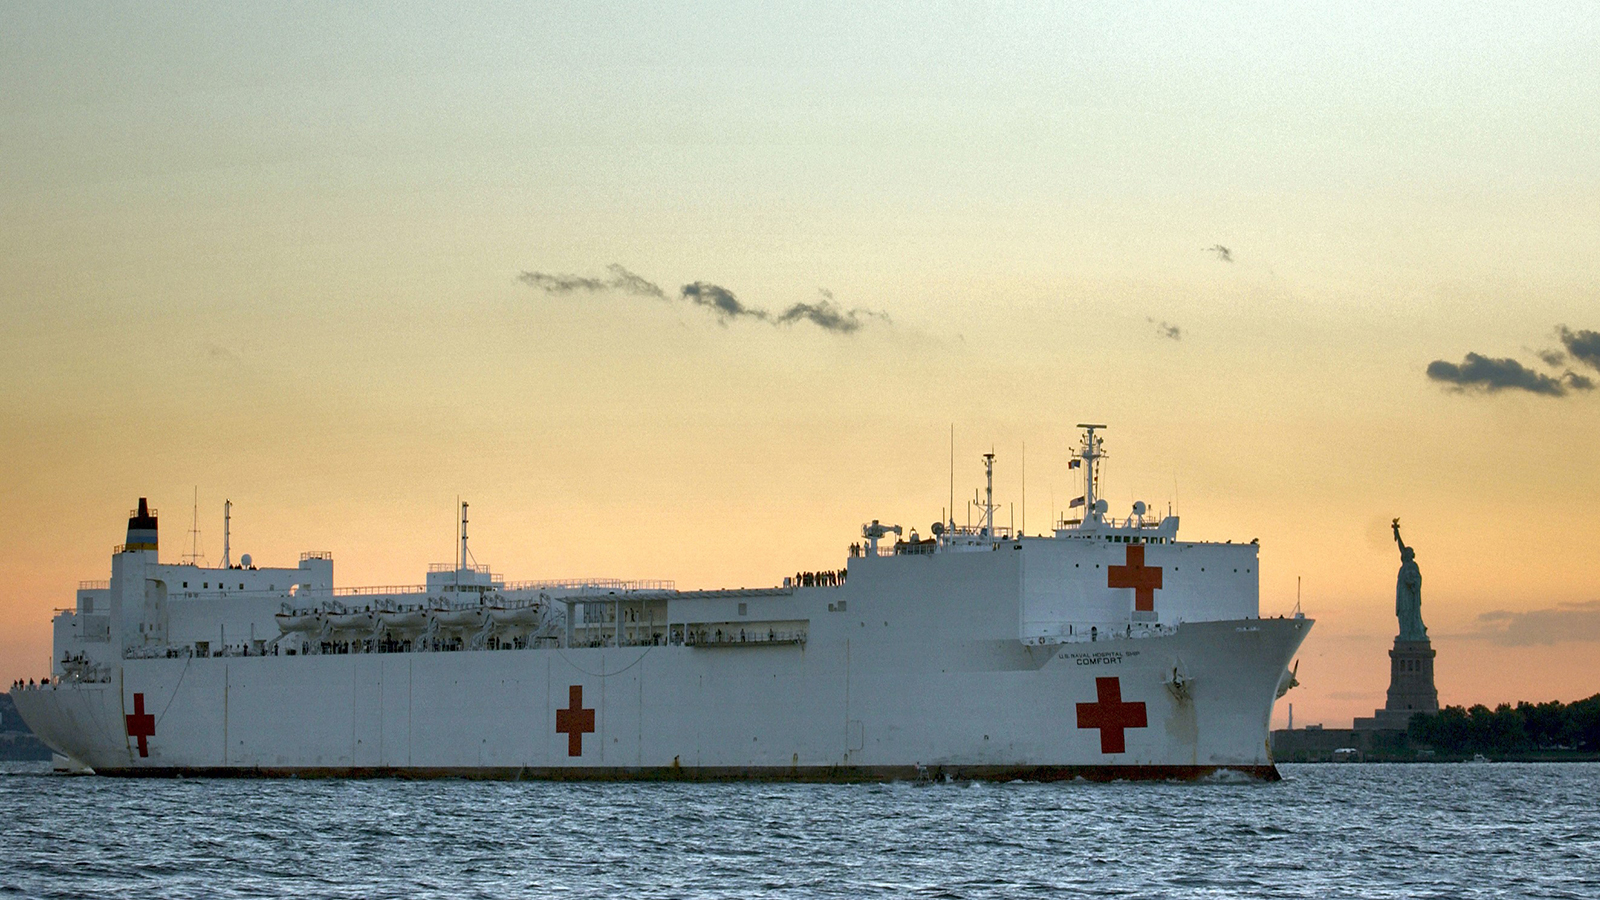 The USNS Comfort sails into New York Harbor with the Statue of Liberty in the background.